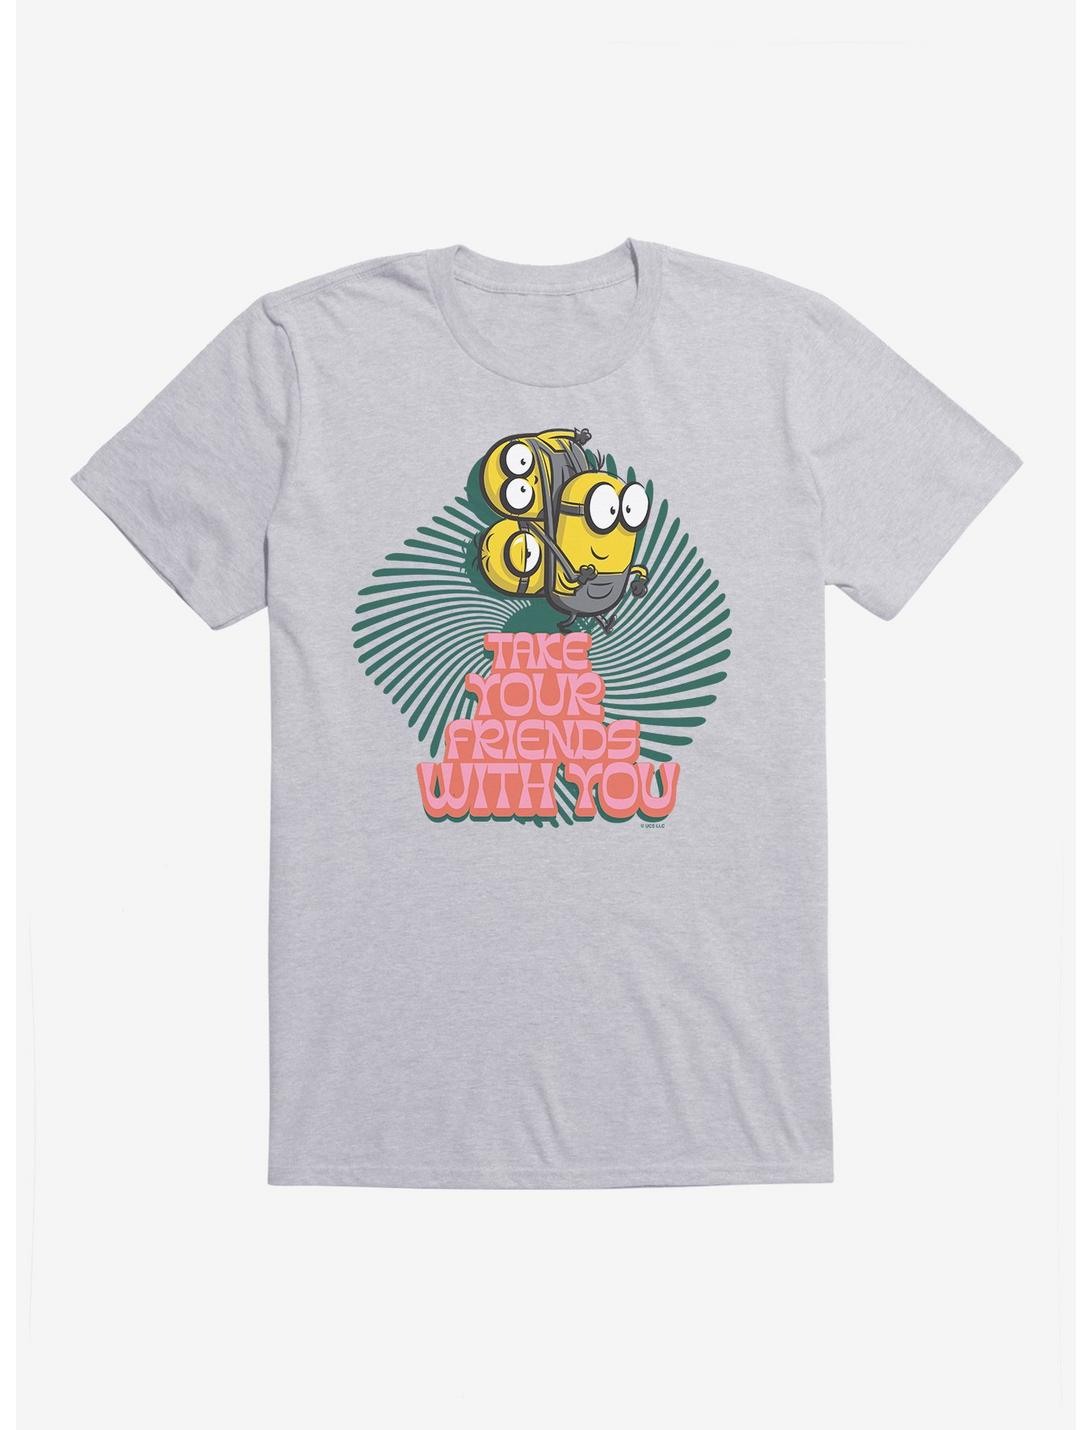 Minions Groovy Take Your Friends T-Shirt, HEATHER GREY, hi-res